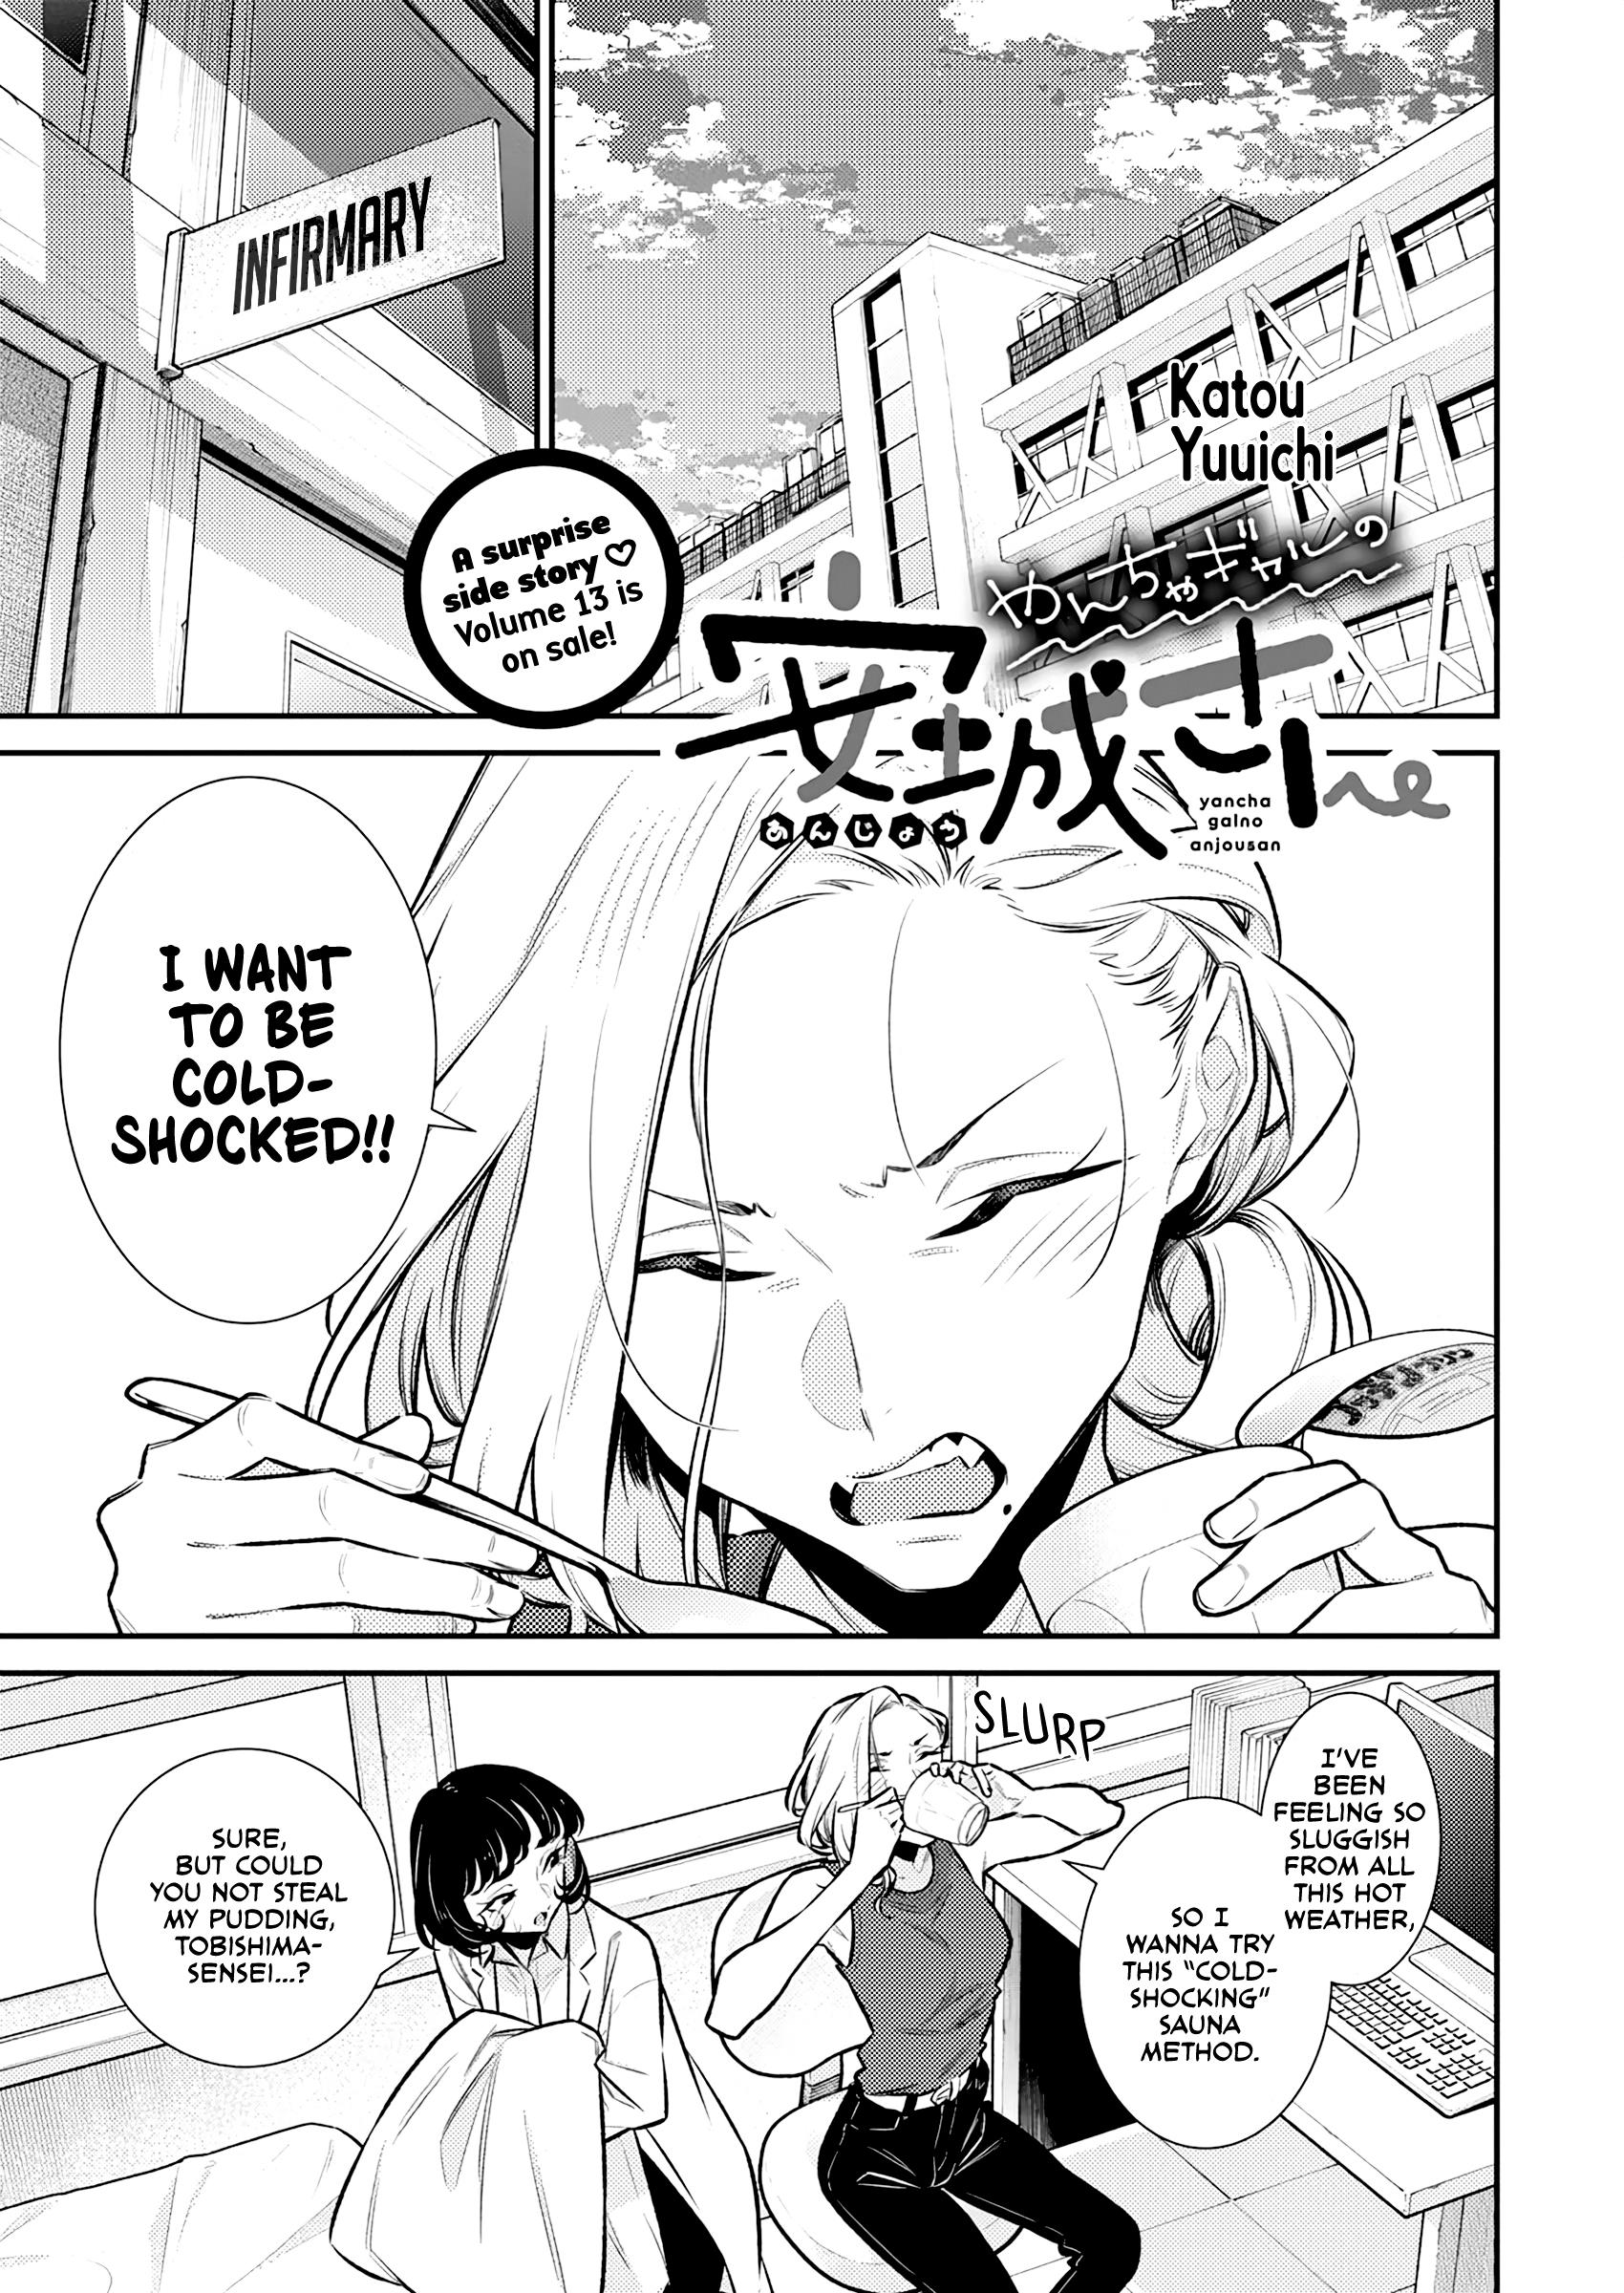 Yancha Gal No Anjou-San Vol.14 Chapter 165.5: Komaki-Sensei Doesn't Want To Be Cold-Shocked - Picture 1